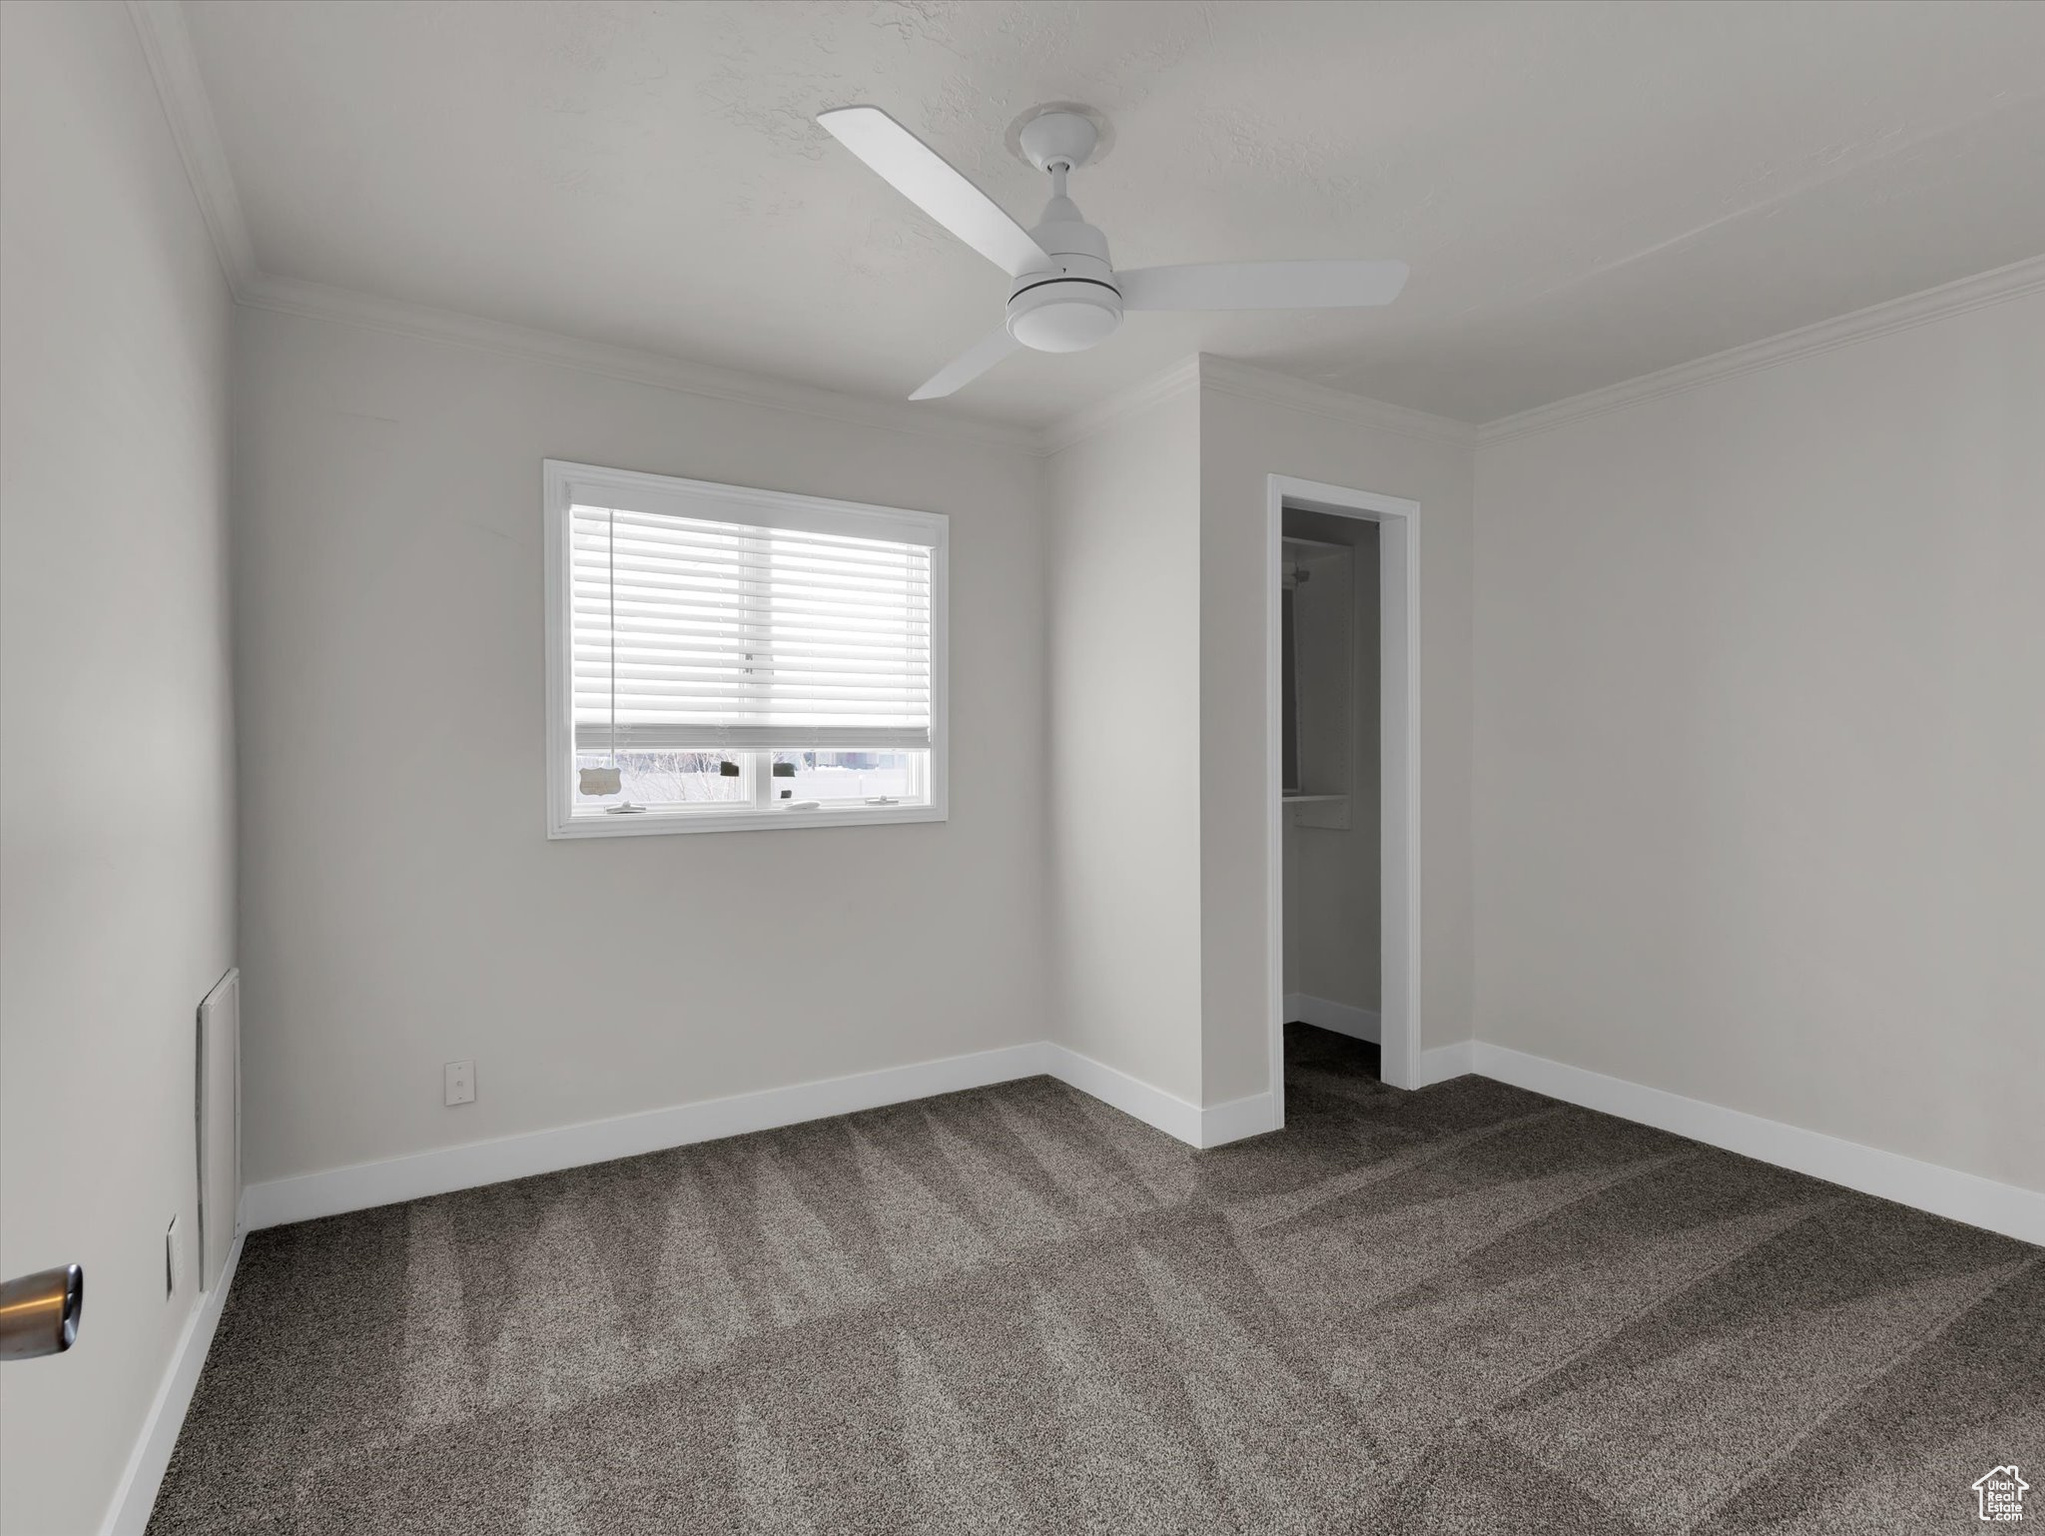 Unfurnished bedroom featuring ornamental molding, a closet, ceiling fan, and dark colored carpet